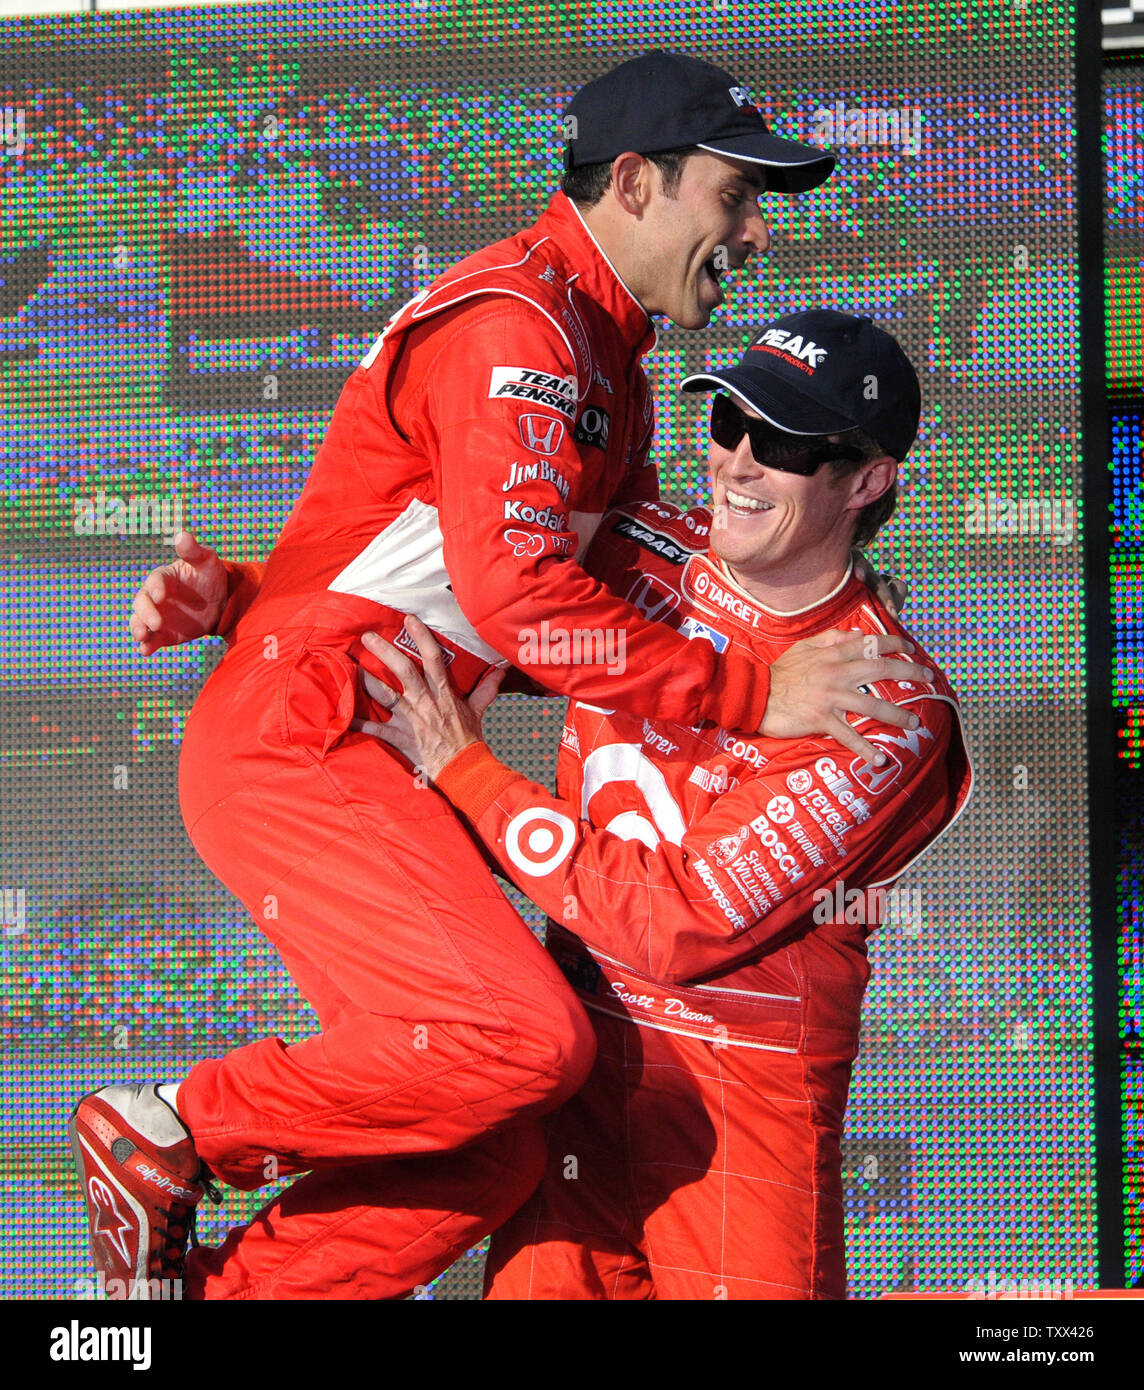 Helio Castroneves, winner of the Peak 300, leaps into the arms of his teammate Ryan Briscoe, who finished third, in the winners circle at the Chicagoland Speedway in Joliet, Illinois on September 7, 2008. (UPI Photo/Darrell Hoemann) Stock Photo